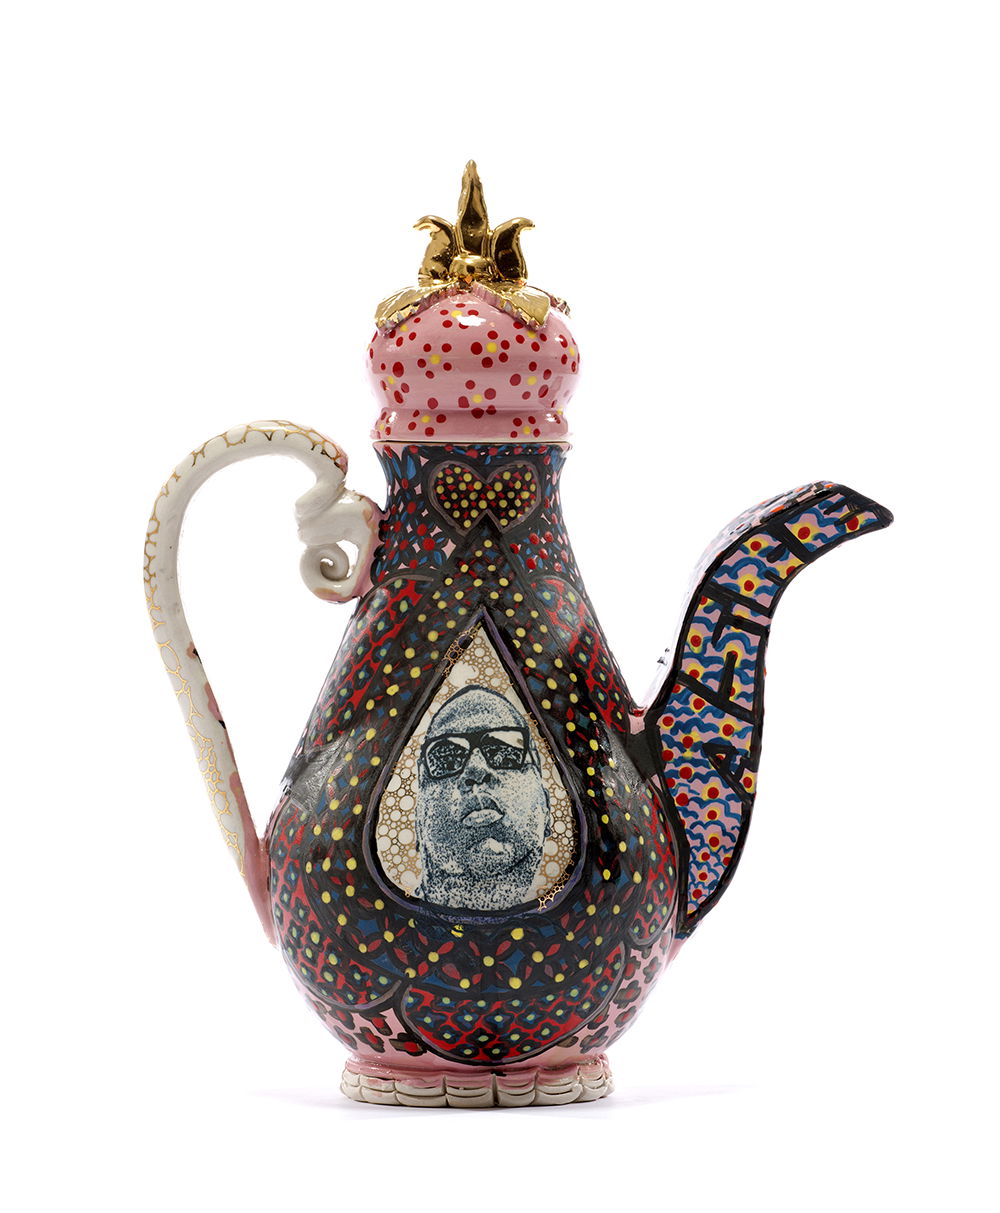 “The Notorious B.I.G Teapot”, Porcelain, 2016. Courtesy of the artist.